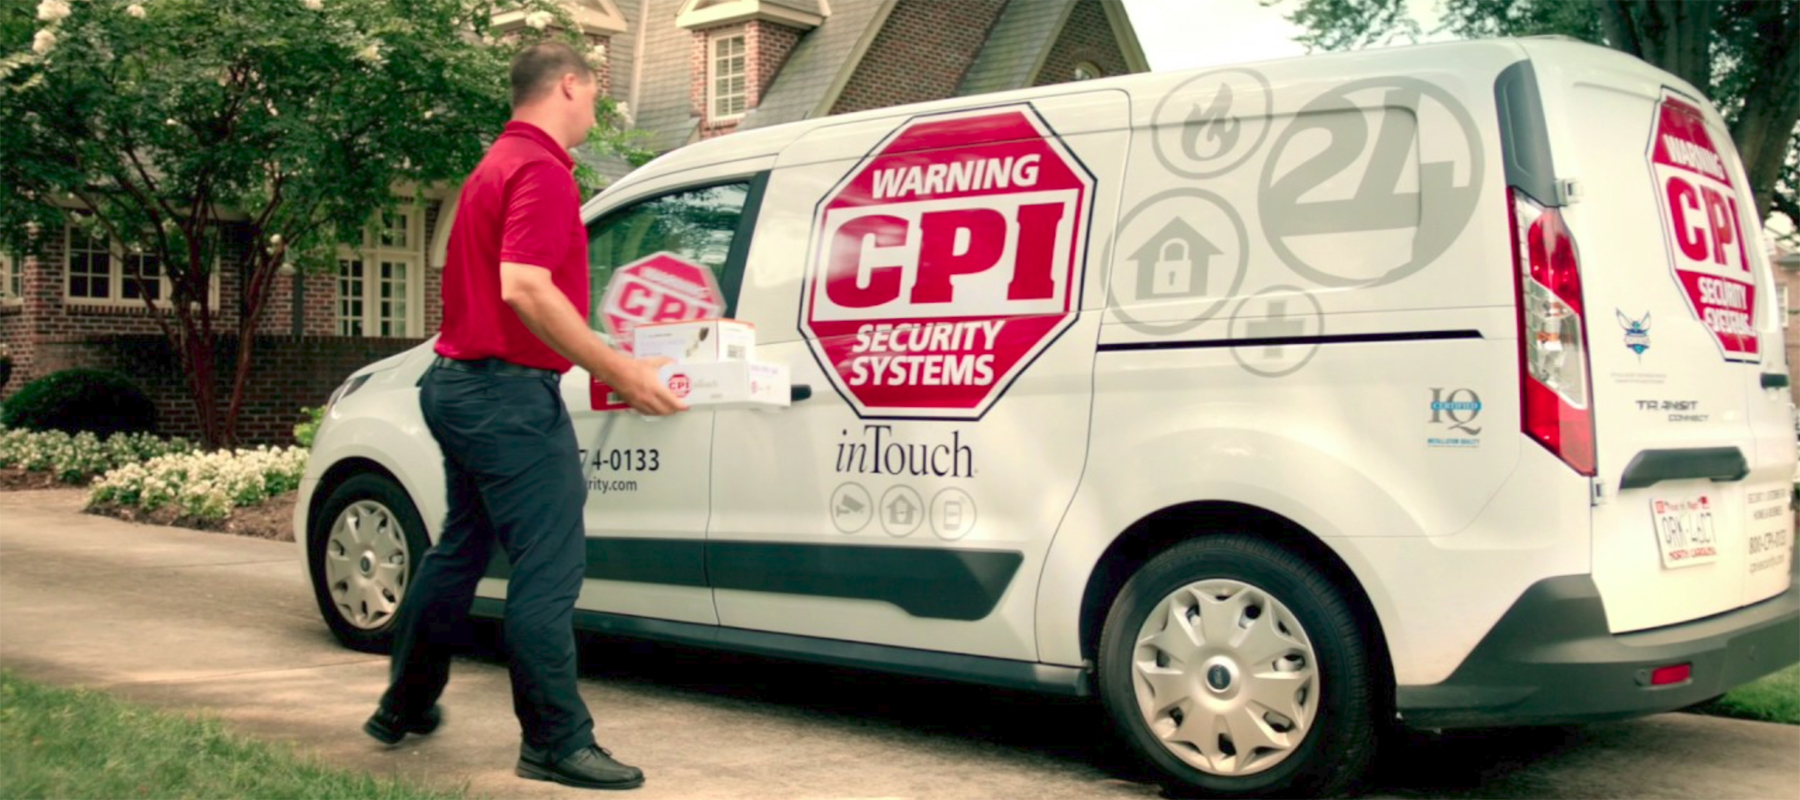 CPI Home Security Van and Employee